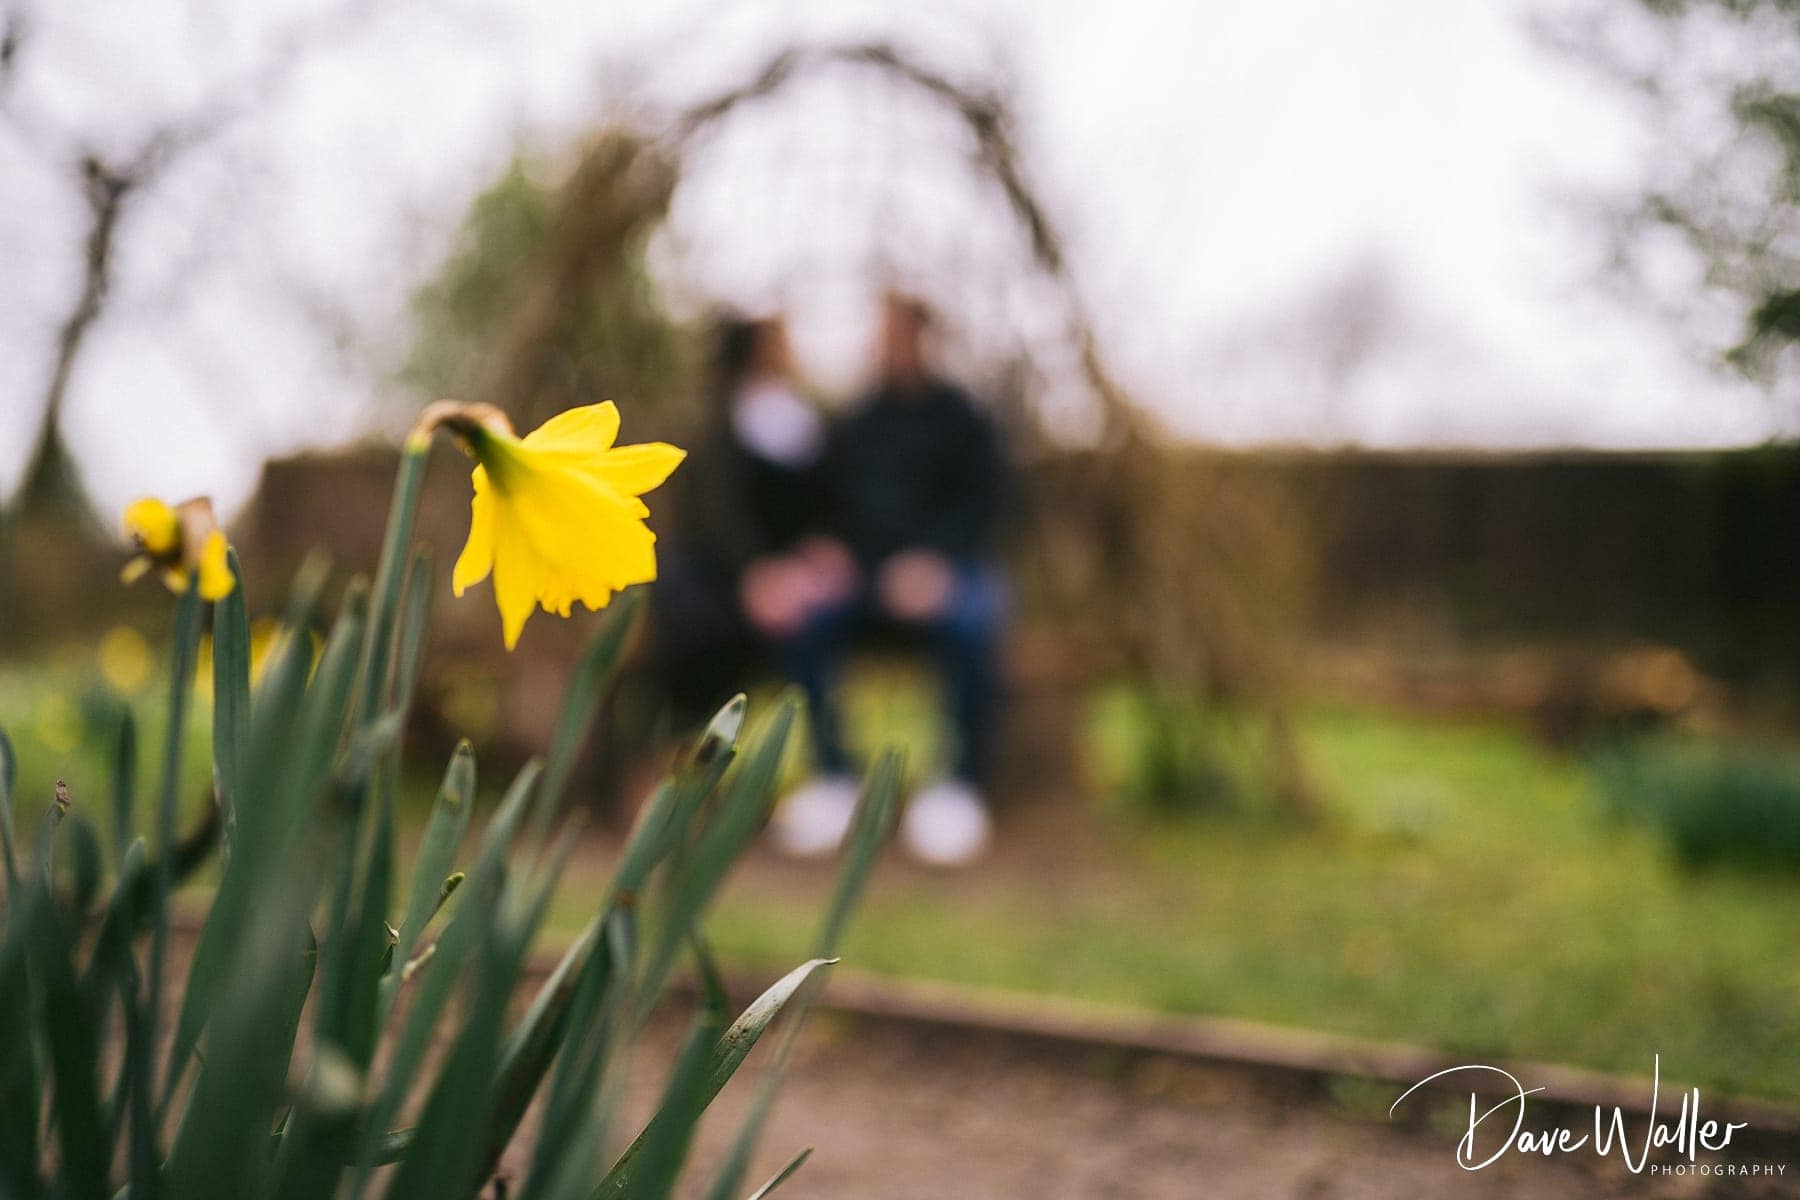 A vibrant yellow daffodil in sharp focus, with a blurred background featuring a person sitting tranquilly on an Oakwell Hall garden bench.